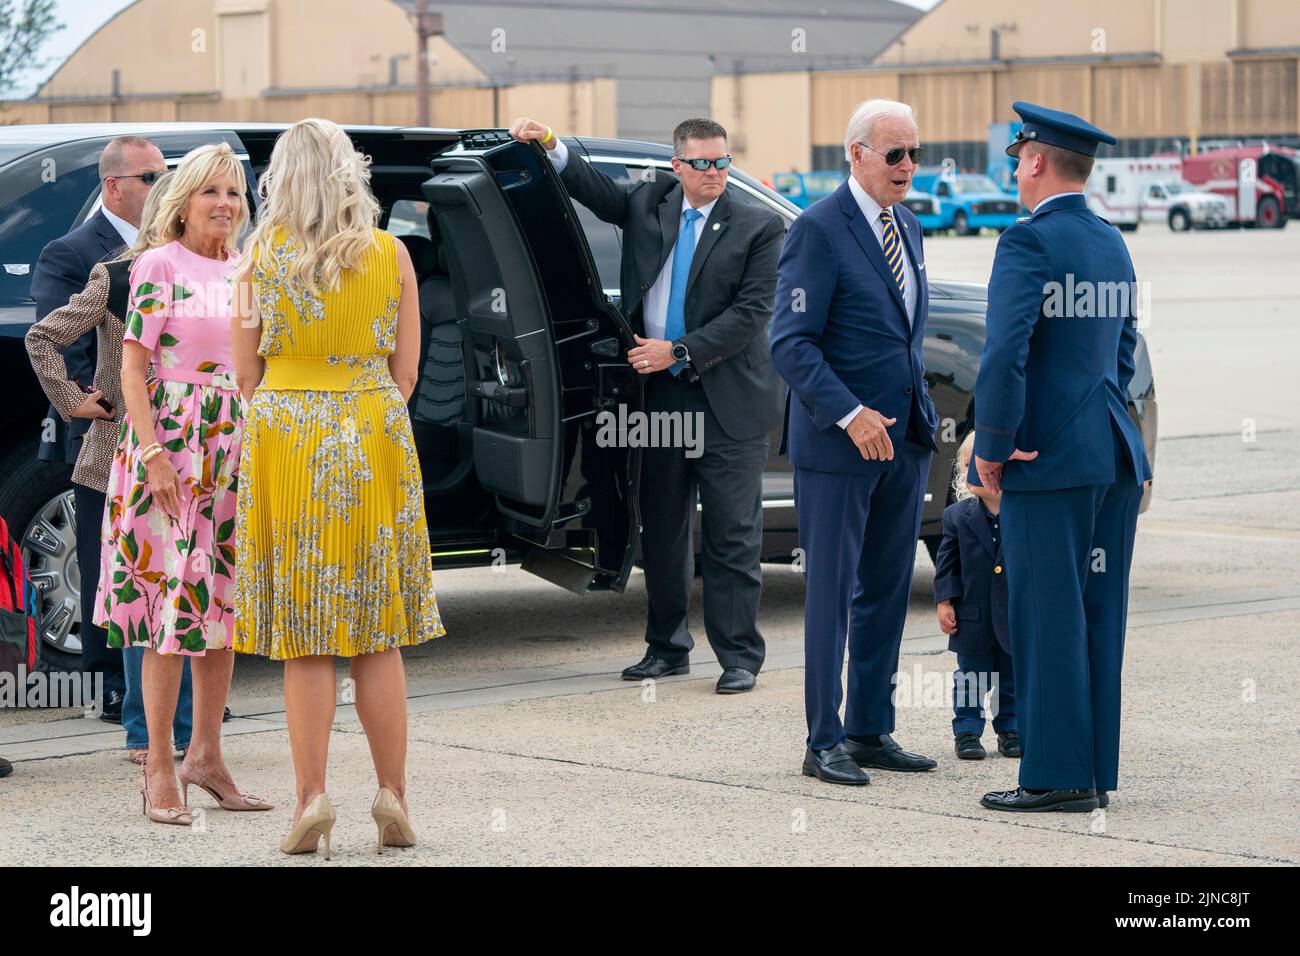 United States President Joe Biden, with First Lady Jill Biden (L), walks to board to board Air Force One at Joint Base Andrews, Maryland, USA, 10 August 2022.Credit: Shawn Thew/Pool via CNP /MediaPunch Stock Photo